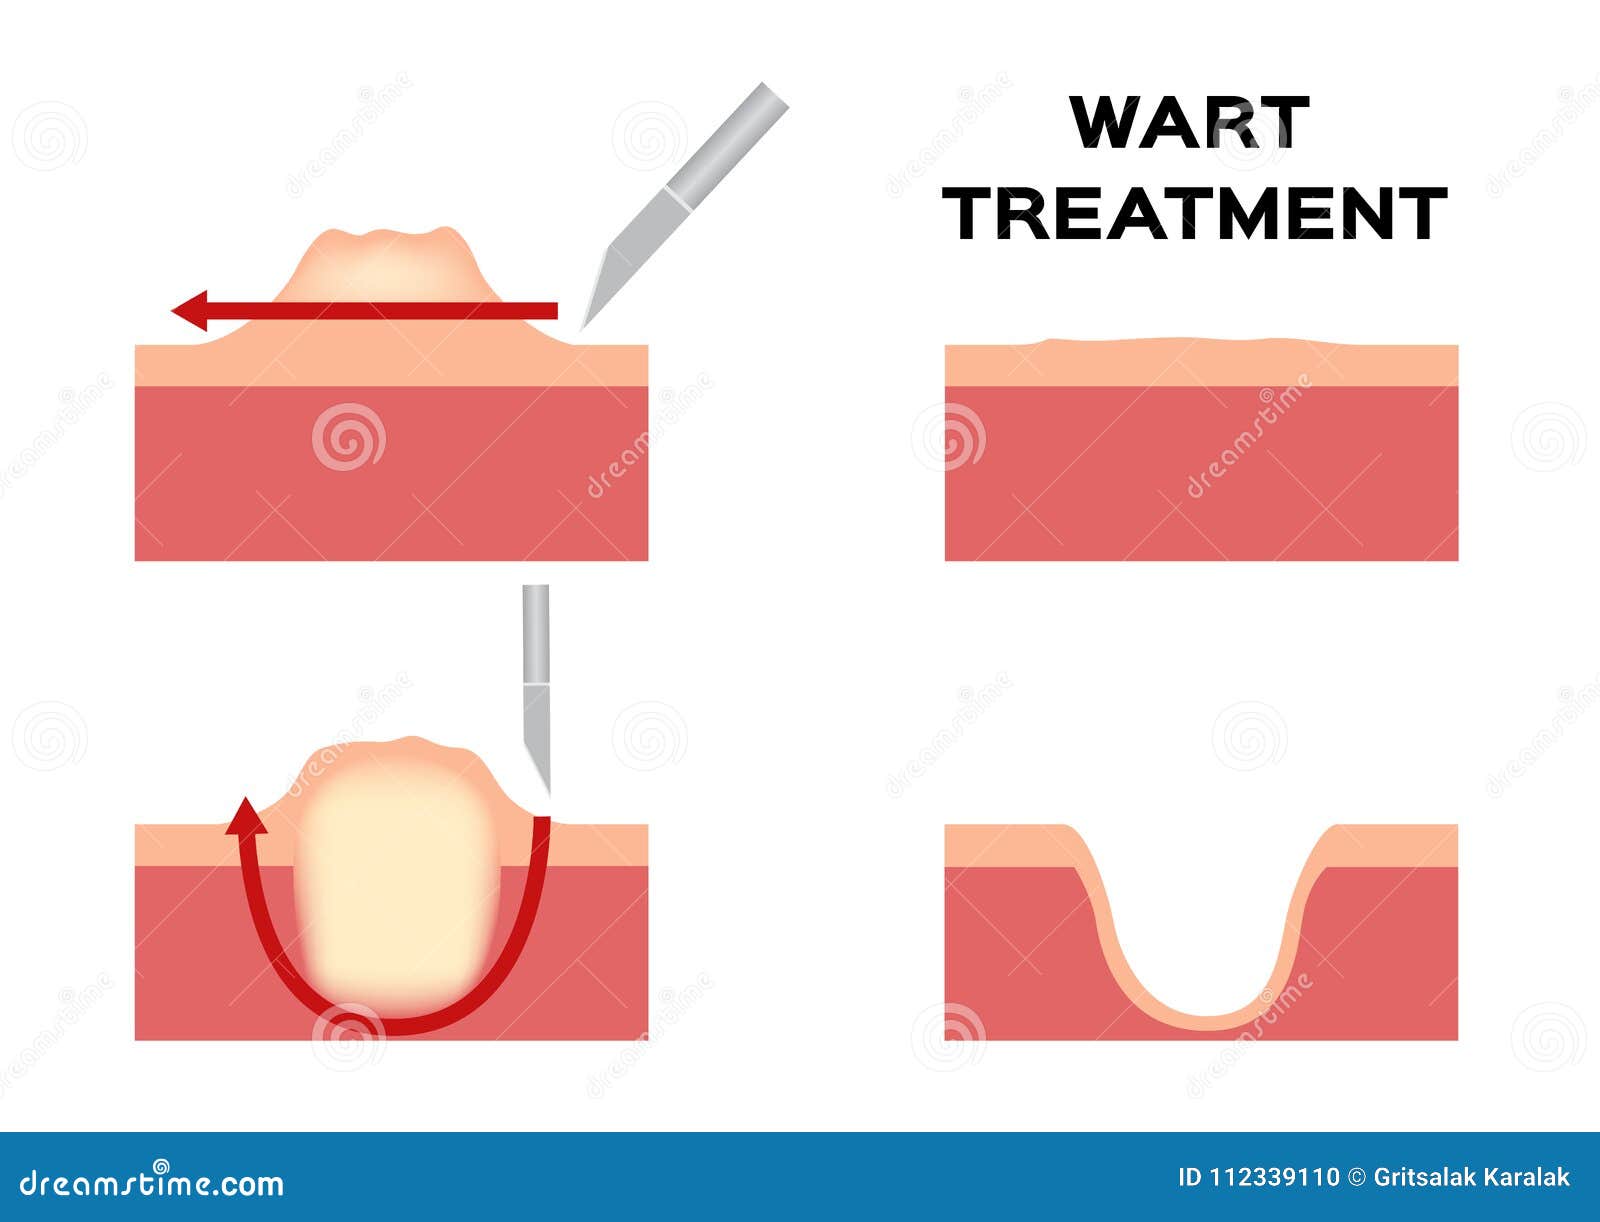 wart treatment . remove it from skin by surgery callus